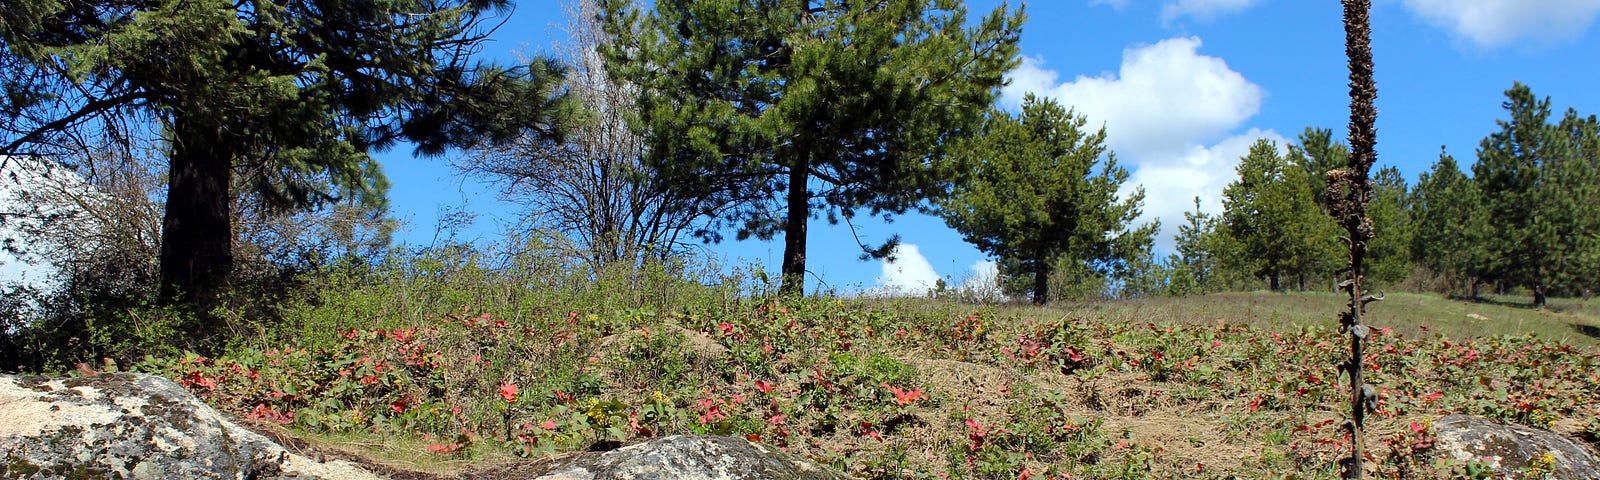 Tall pine trees stand guard over a rocky hillside dotted with red-leaved shrubs under a bright blue sky. A solitary, spiky plant takes center stage in the foreground, reaching upwards amidst the vegetation.